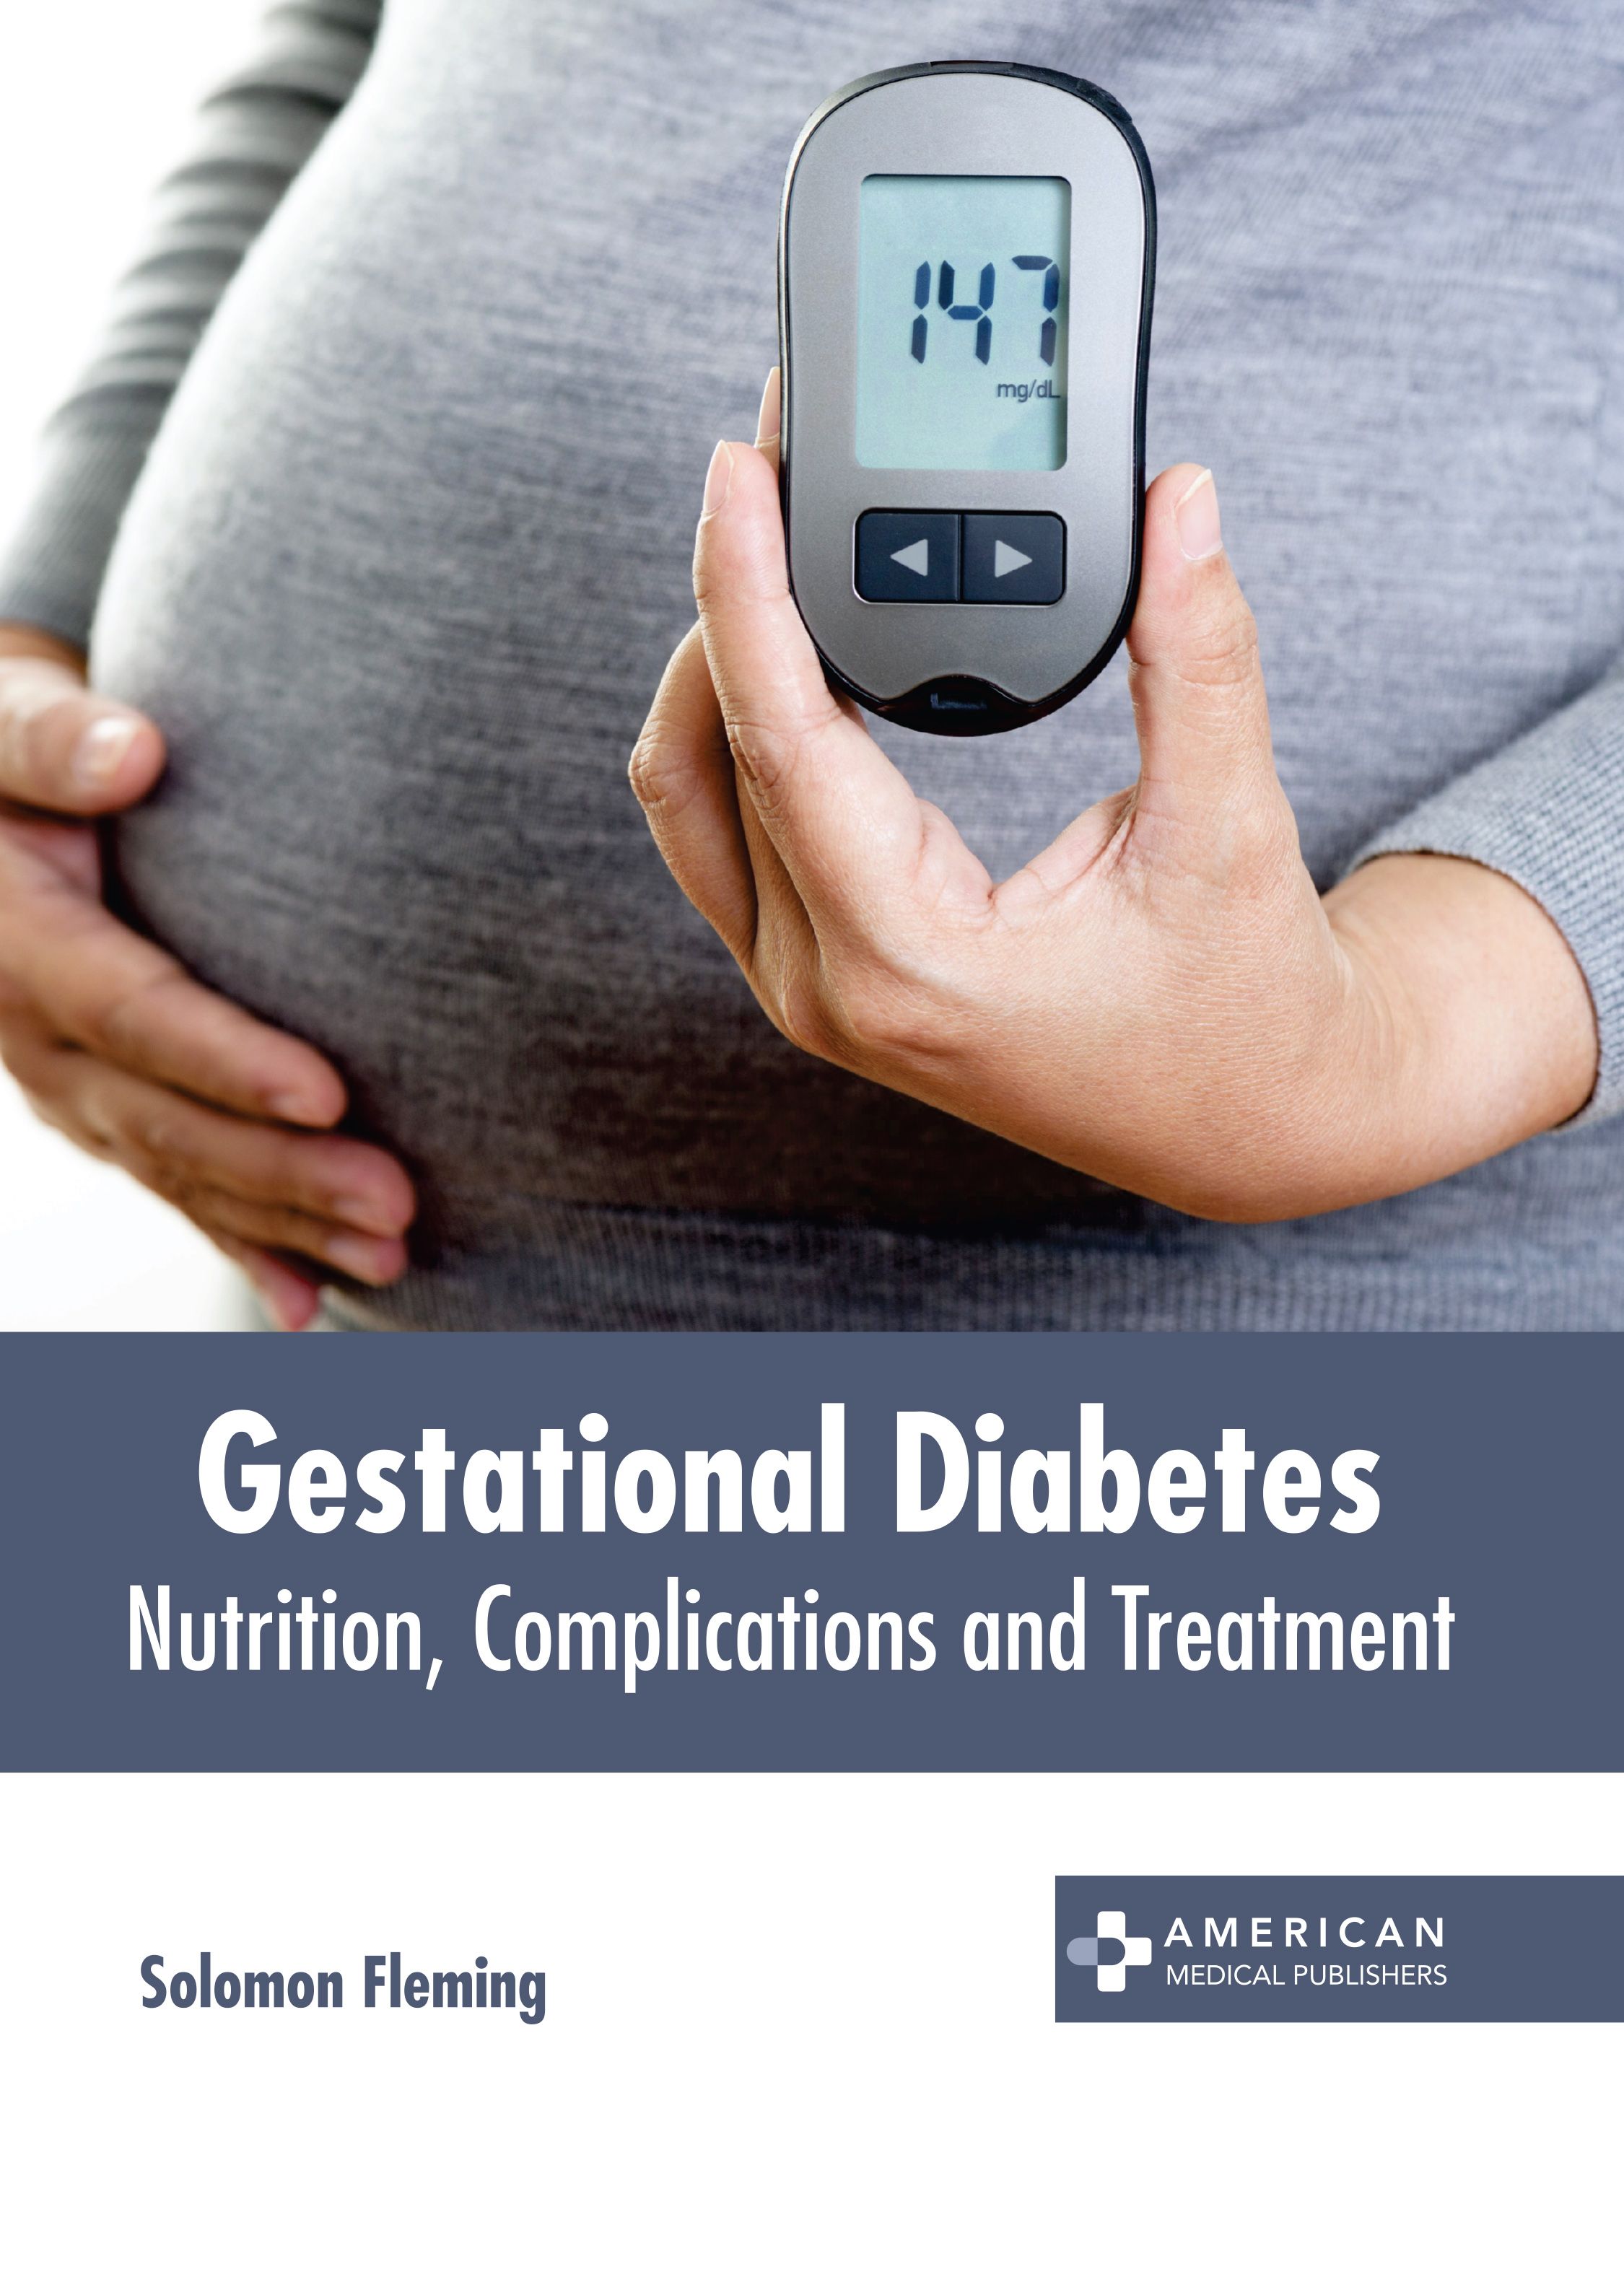 GESTATIONAL DIABETES: NUTRITION, COMPLICATIONS AND TREATMENT